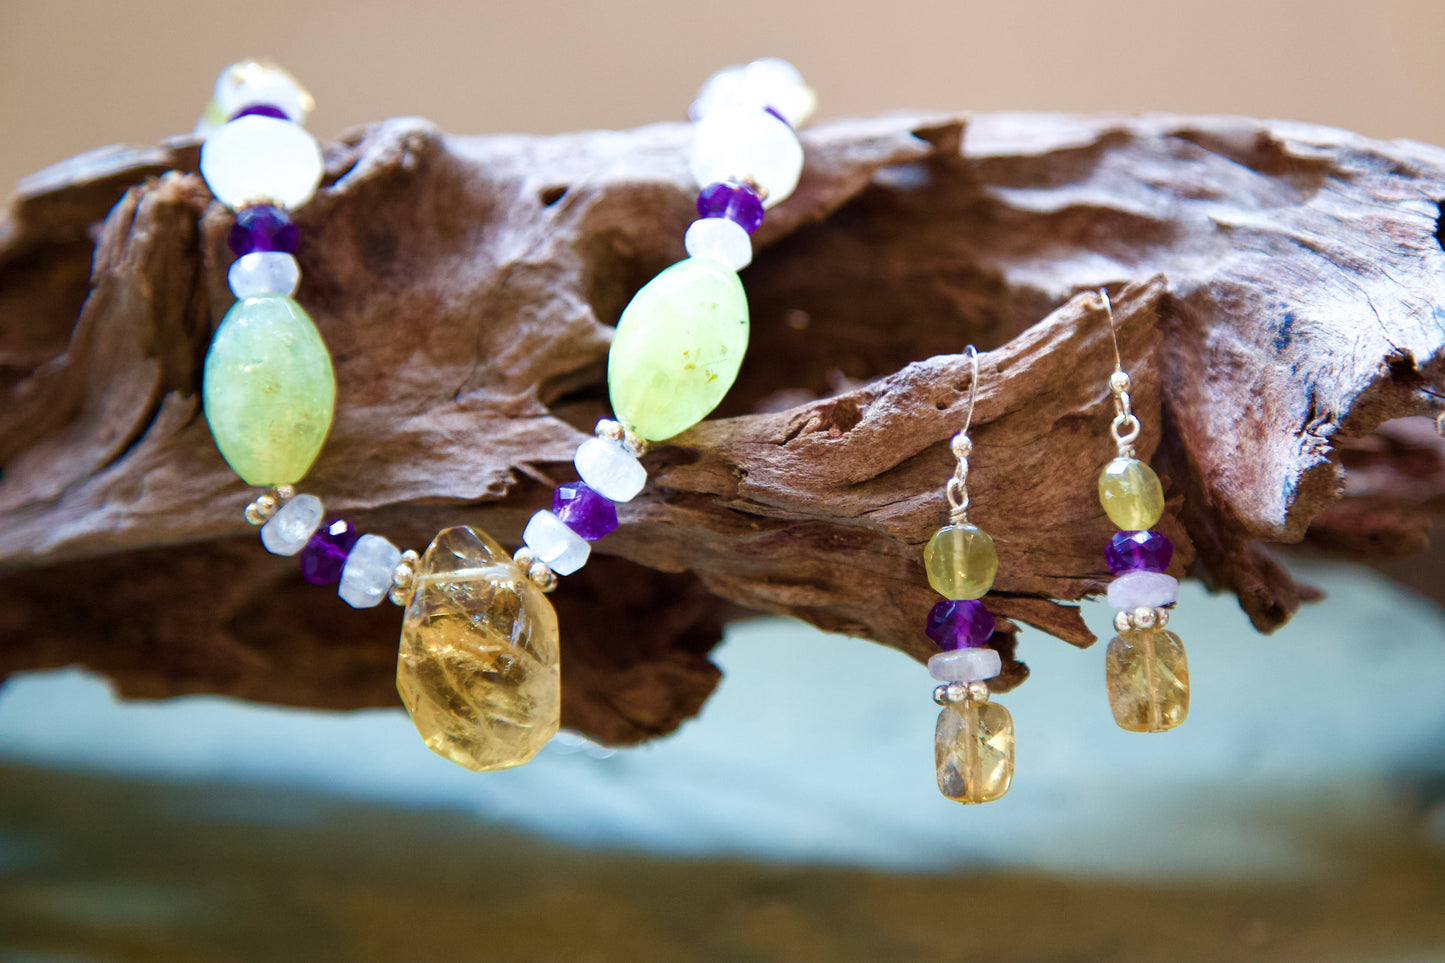 Citrine, Prehnite, Amethyst, Colorless Calcite, Rainbow Moonstone, Clear Quartz, and Sterling Silver Necklace and Earrings Set